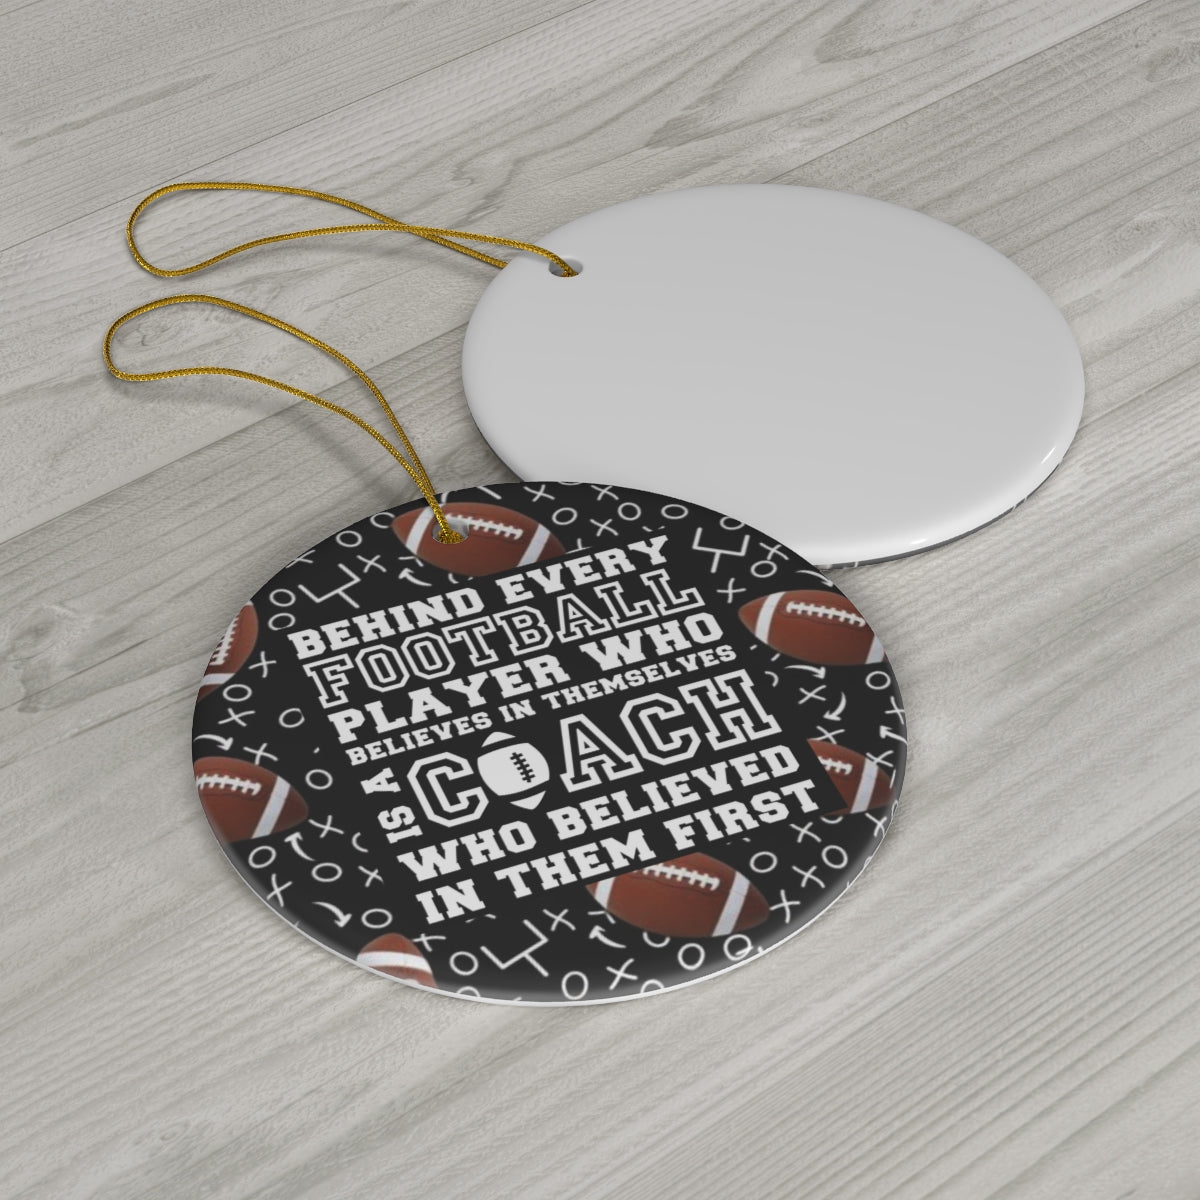 Football Coach Christmas Ornament- Behind Every Player